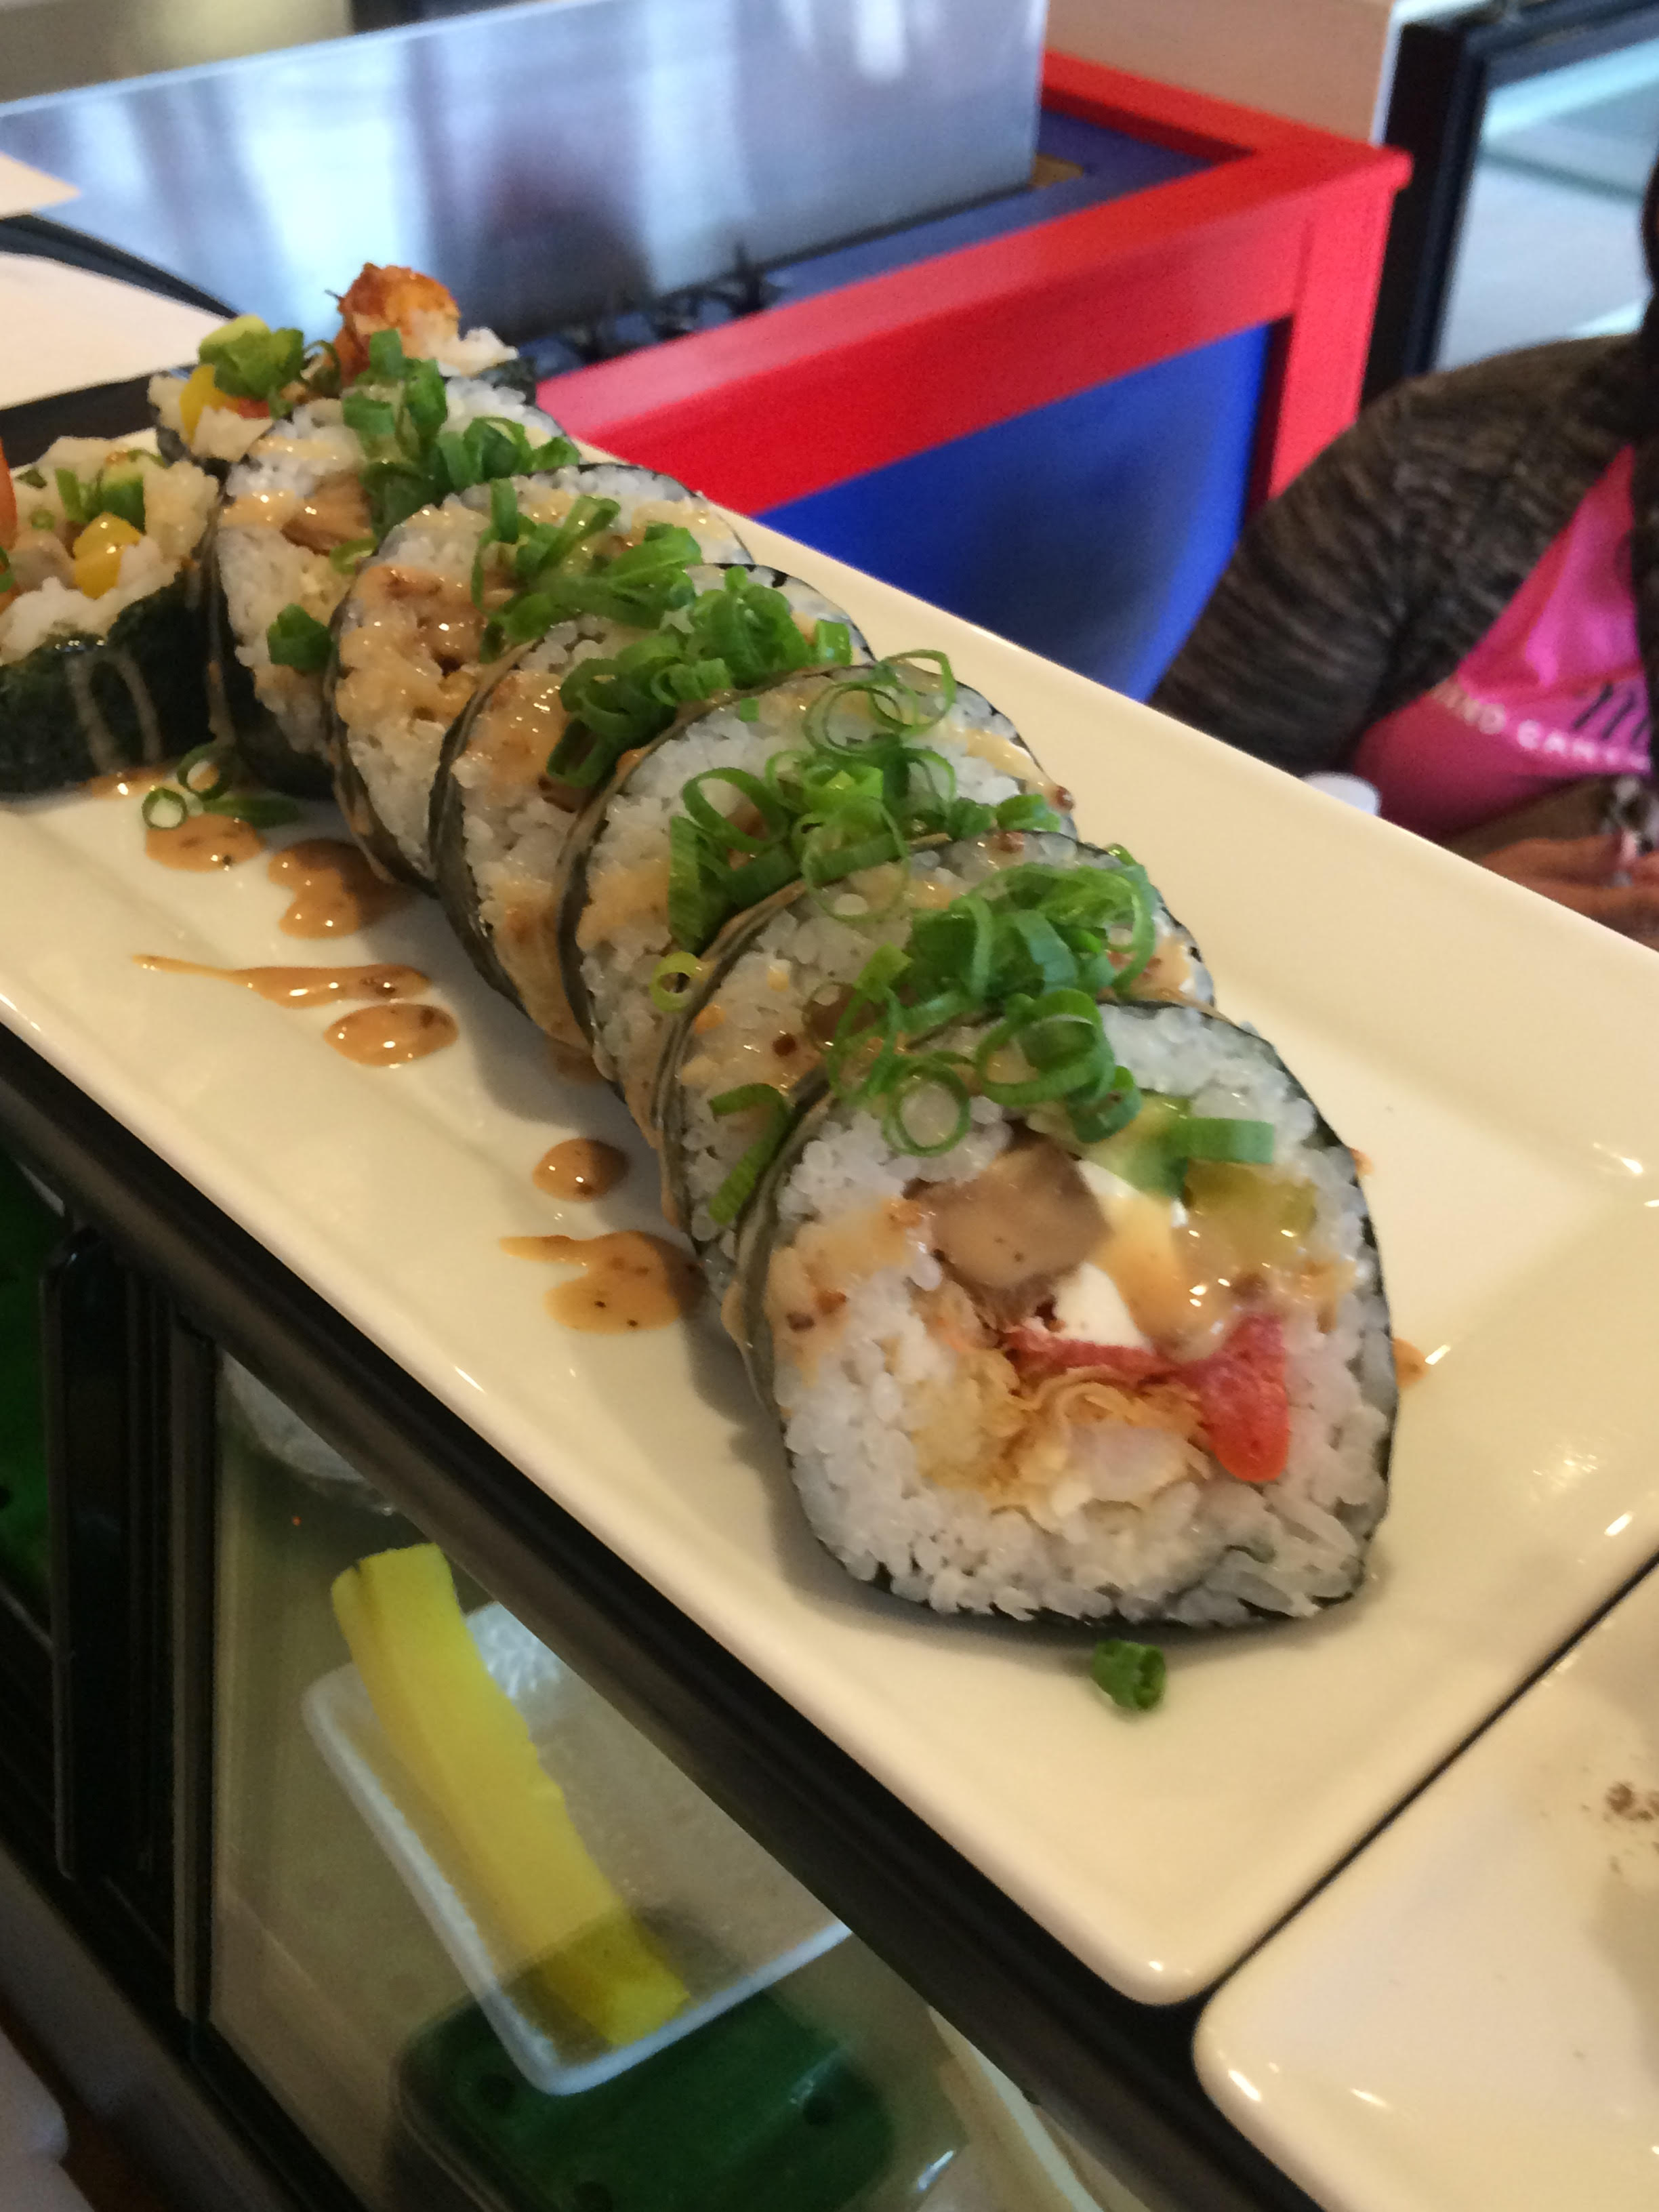 Build-Your-Own at Sushi U | Big Island Now